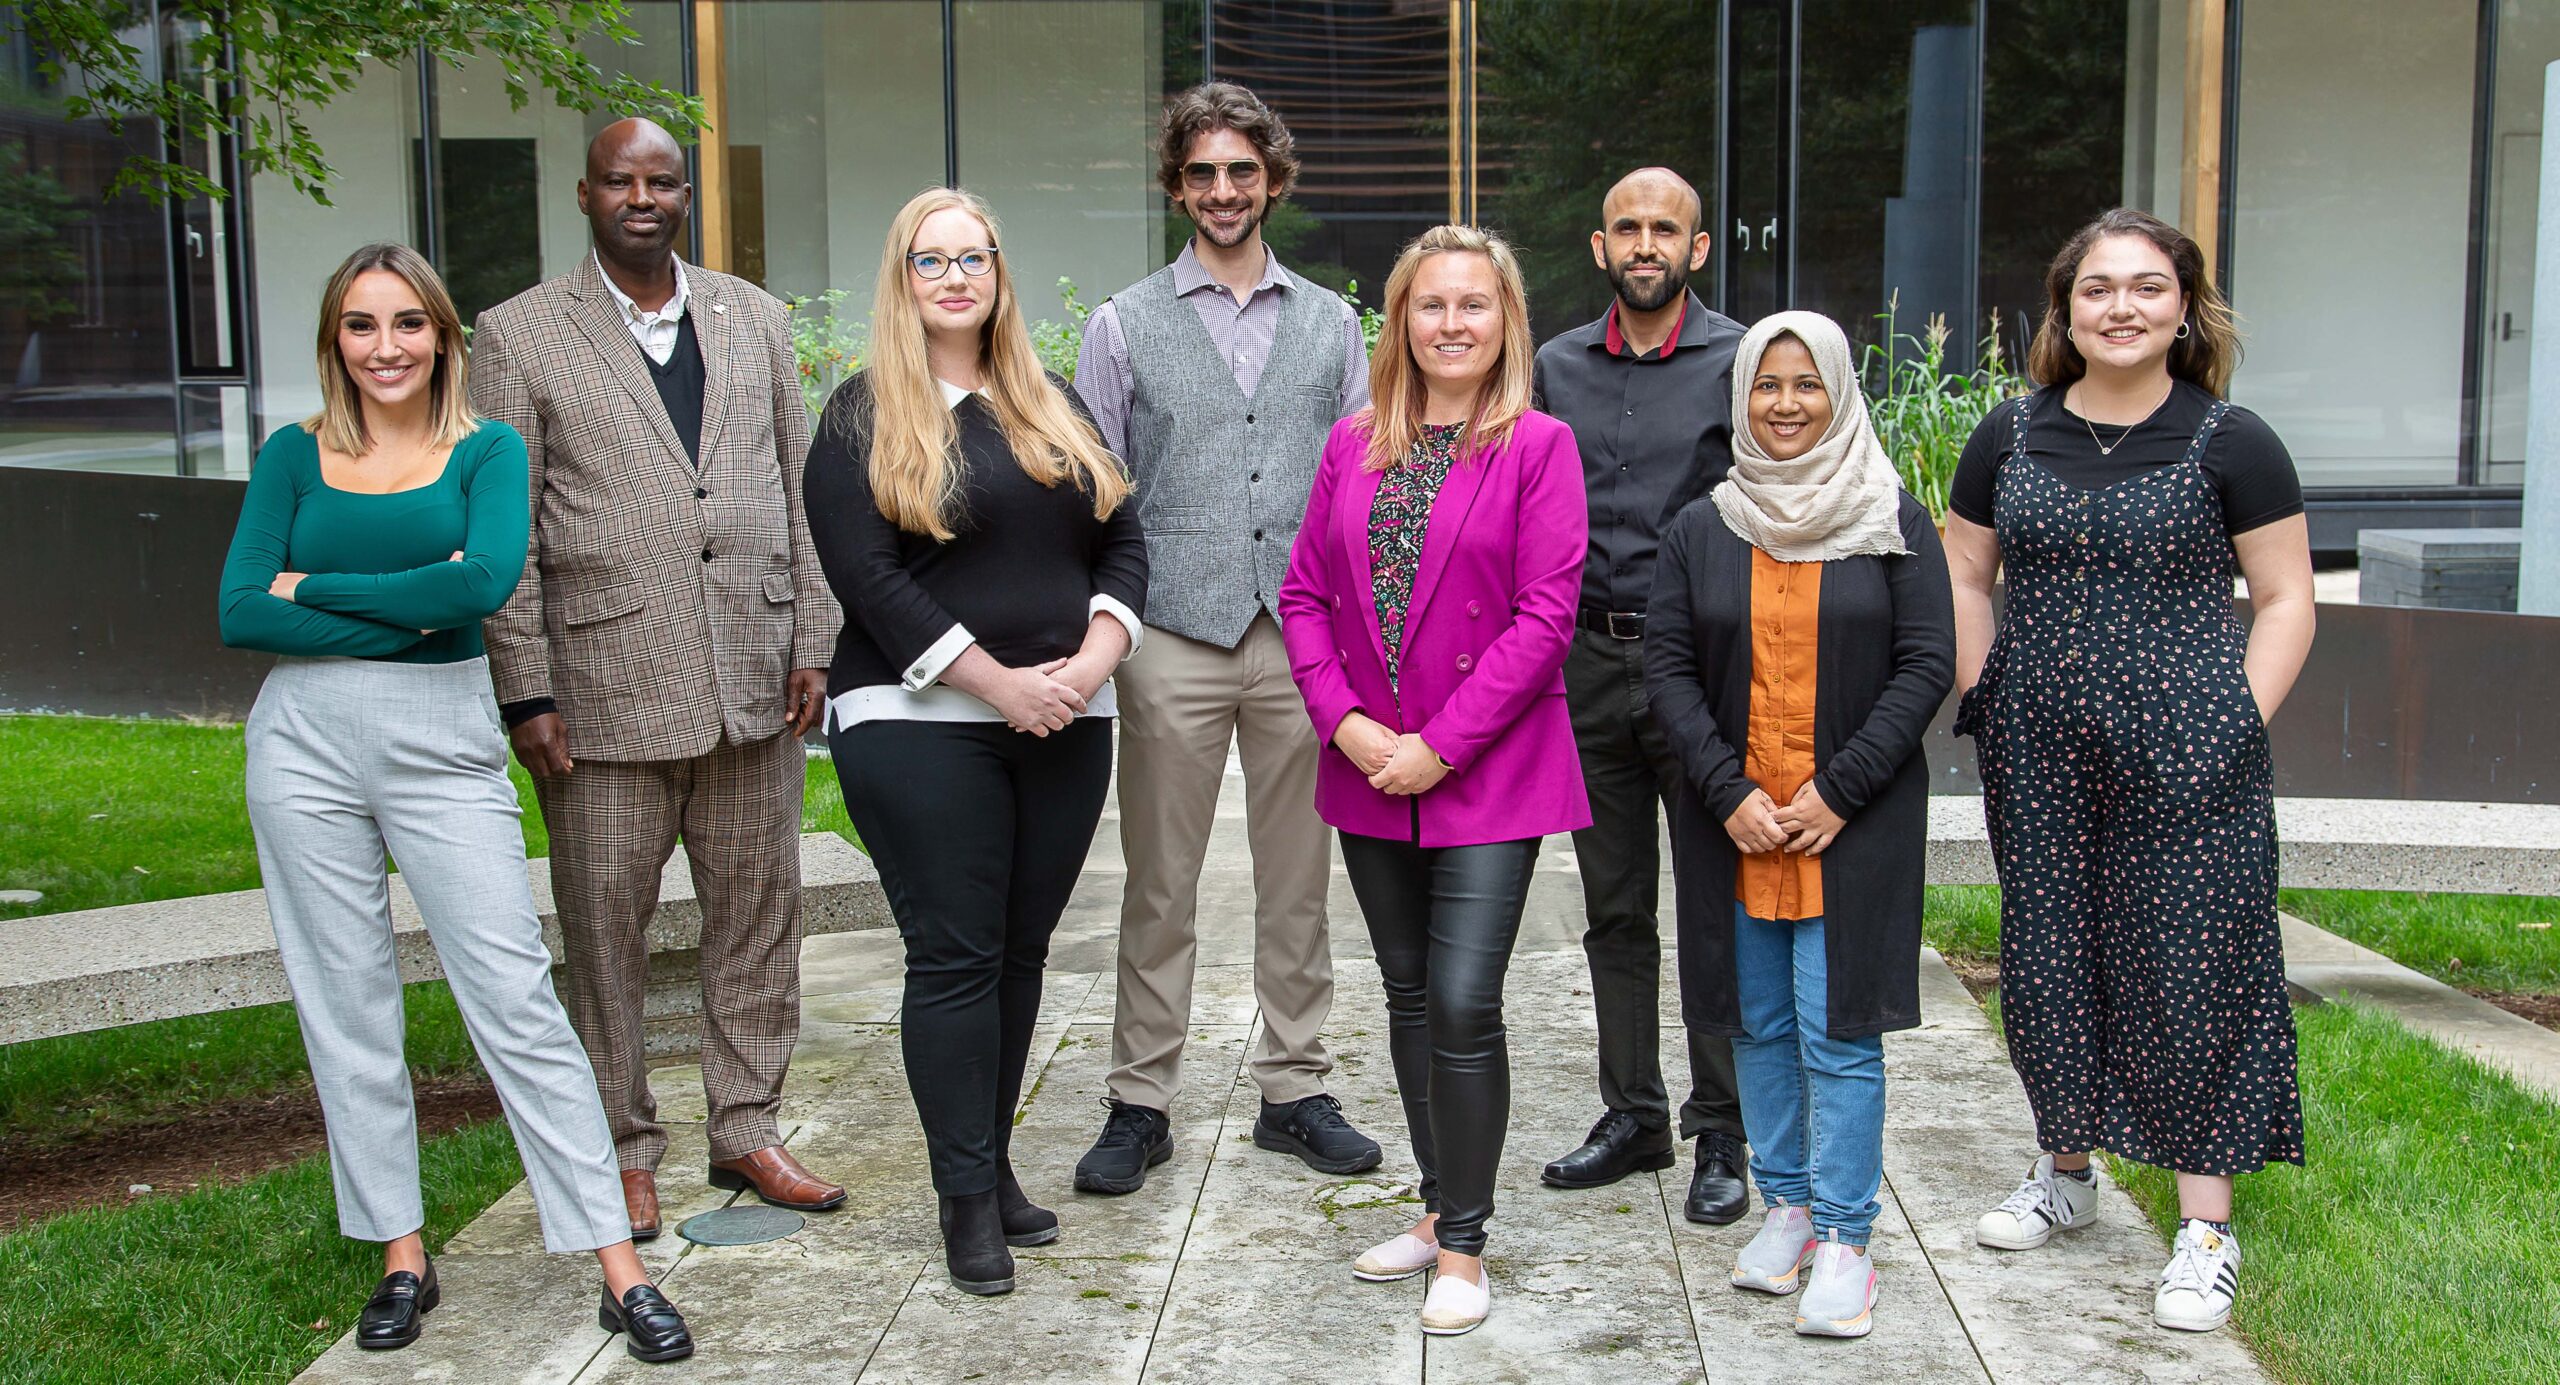 Eight PhD students standing together with a building windows behind them.